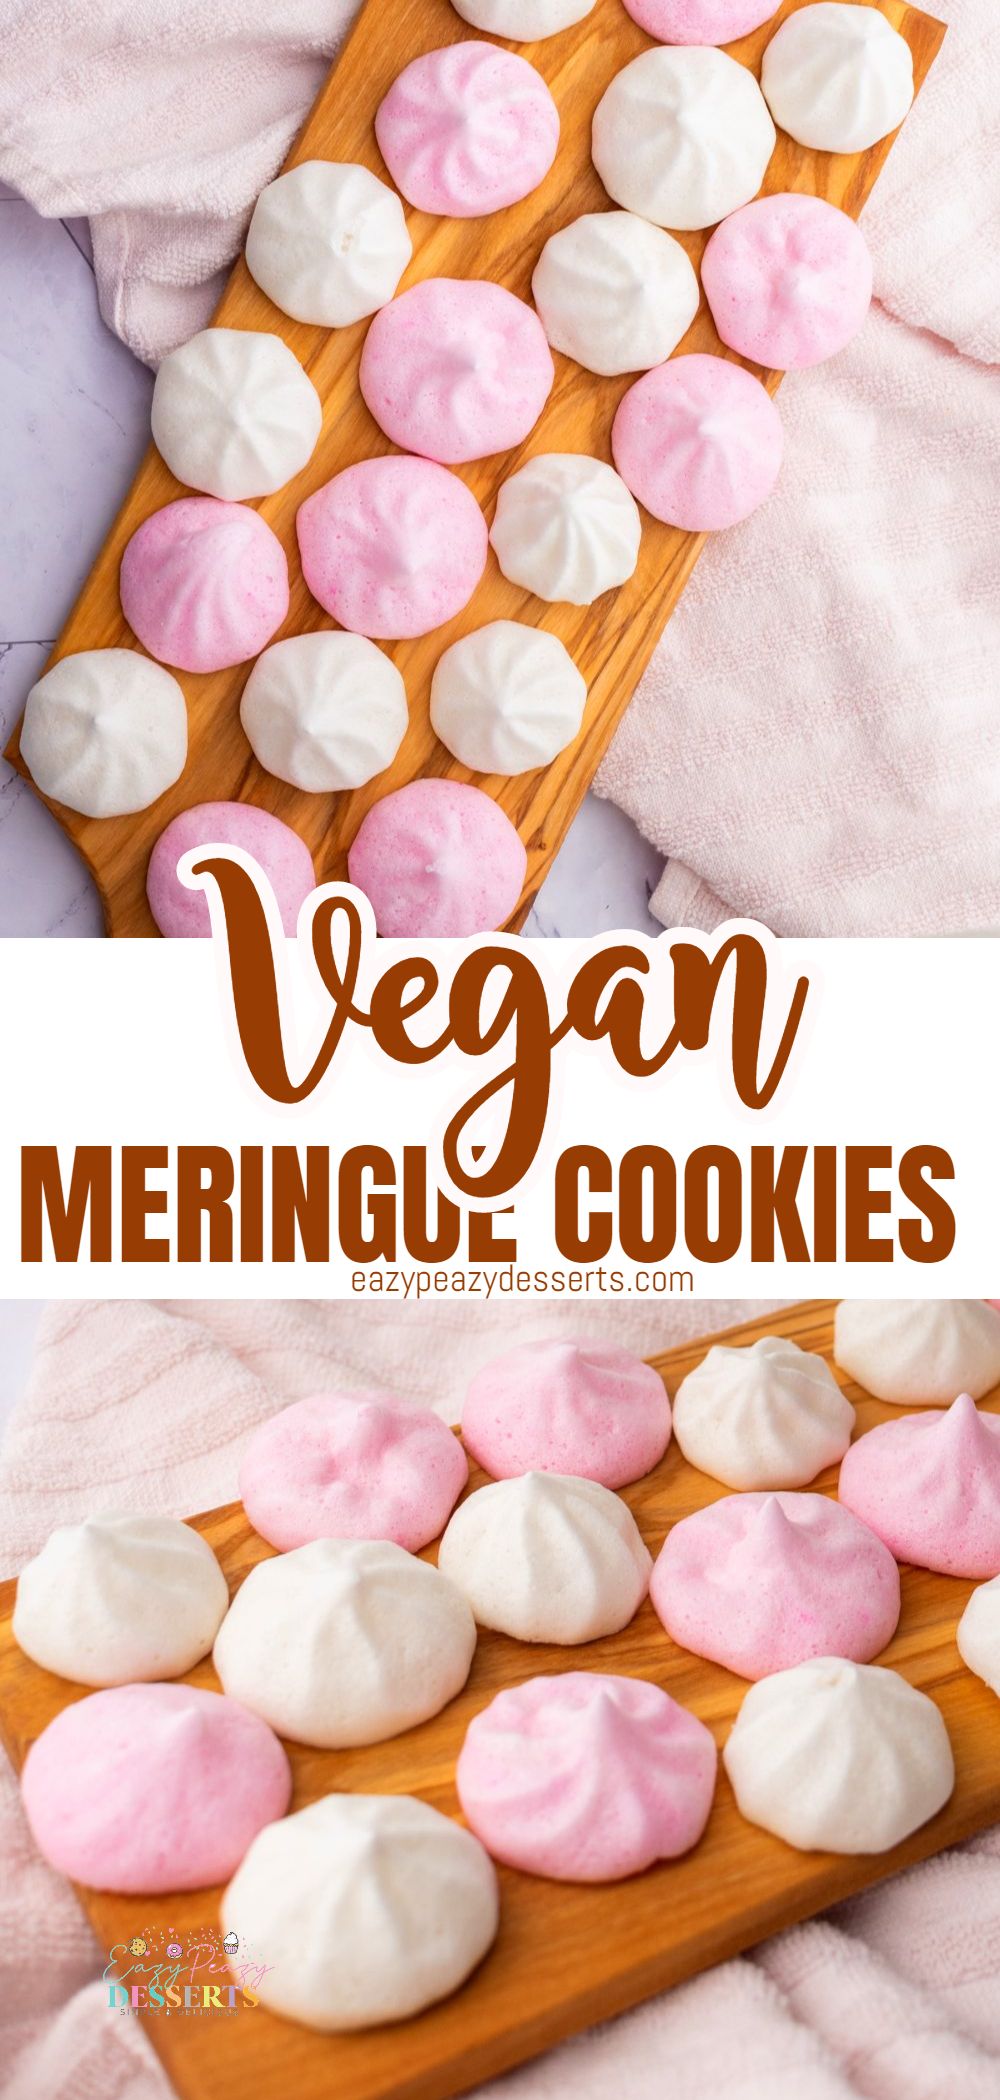 Photo collage of vegan meringues in pink and white colors